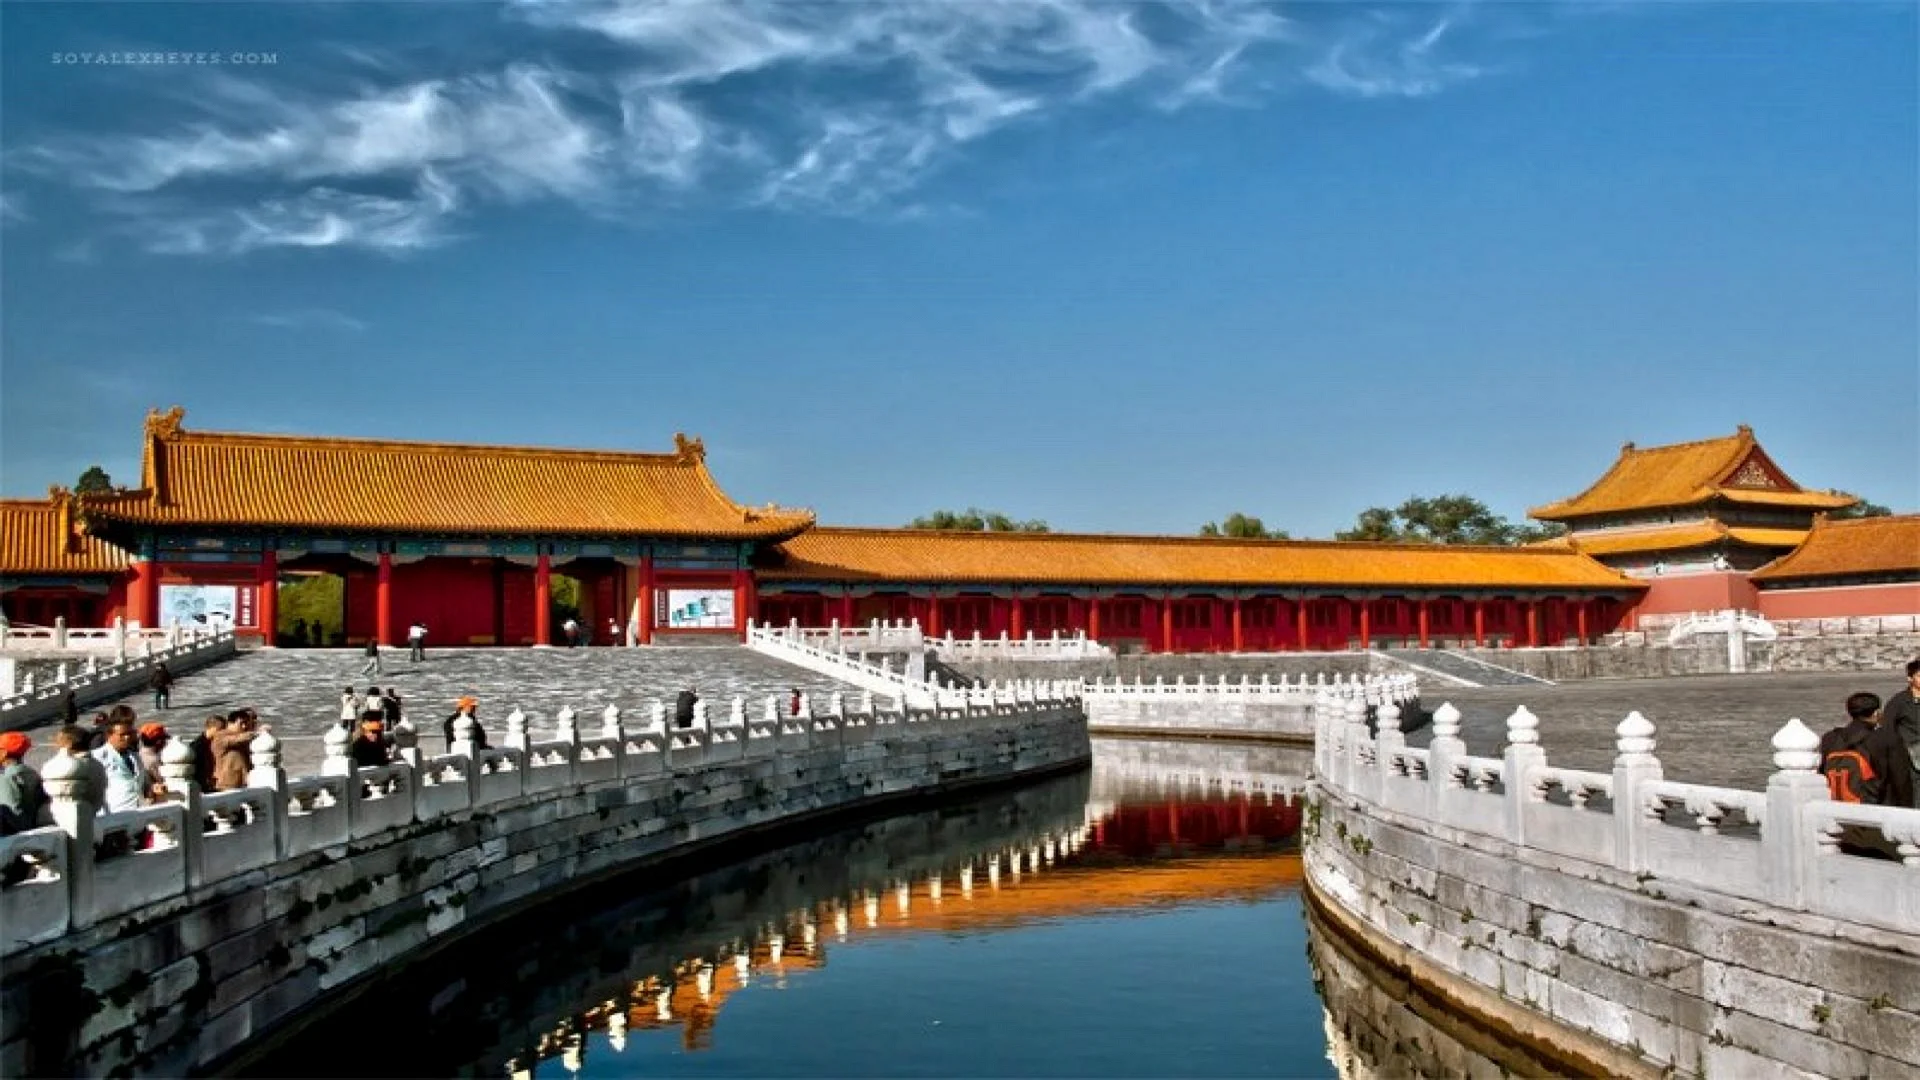 The Forbidden City & The Imperial Palace Beijing Wallpaper